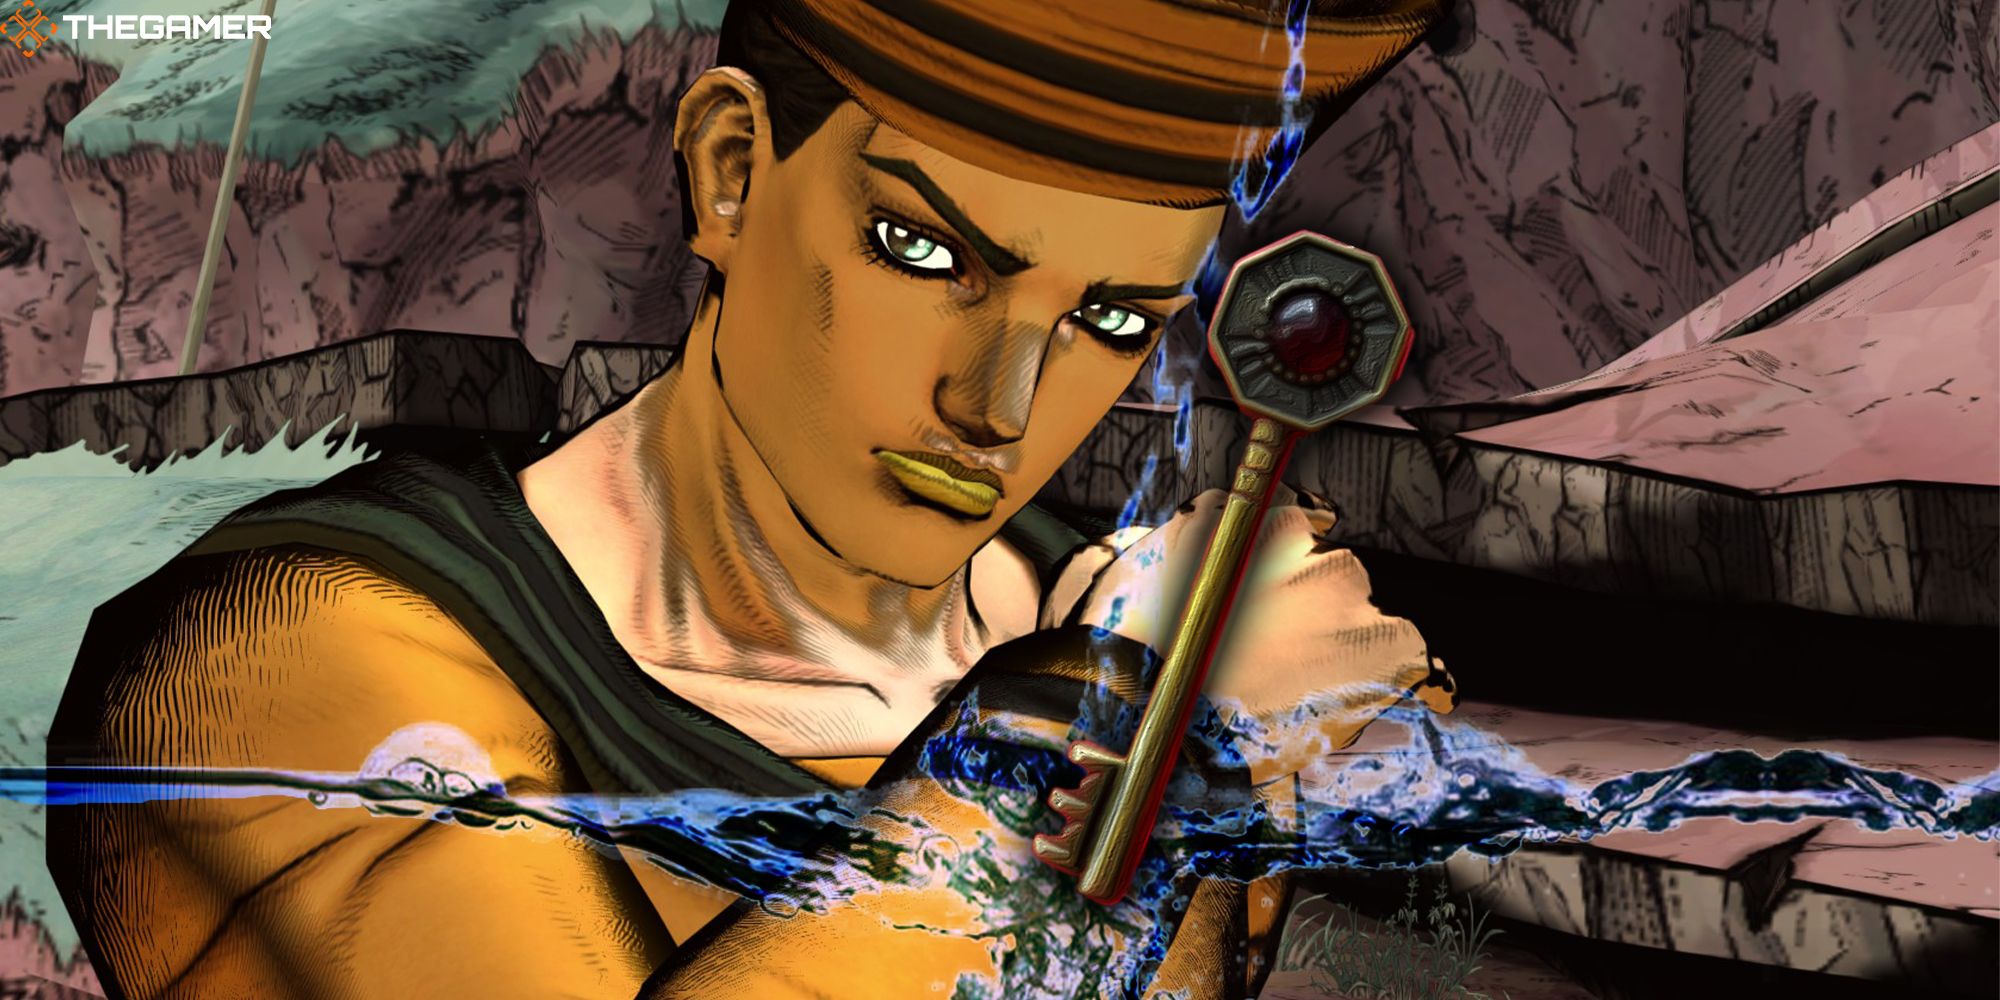 Josuke 8 stands behind a Golden Key falling into a puddle of water in this custom image for JoJo's Bizarre Adventure ASBR.